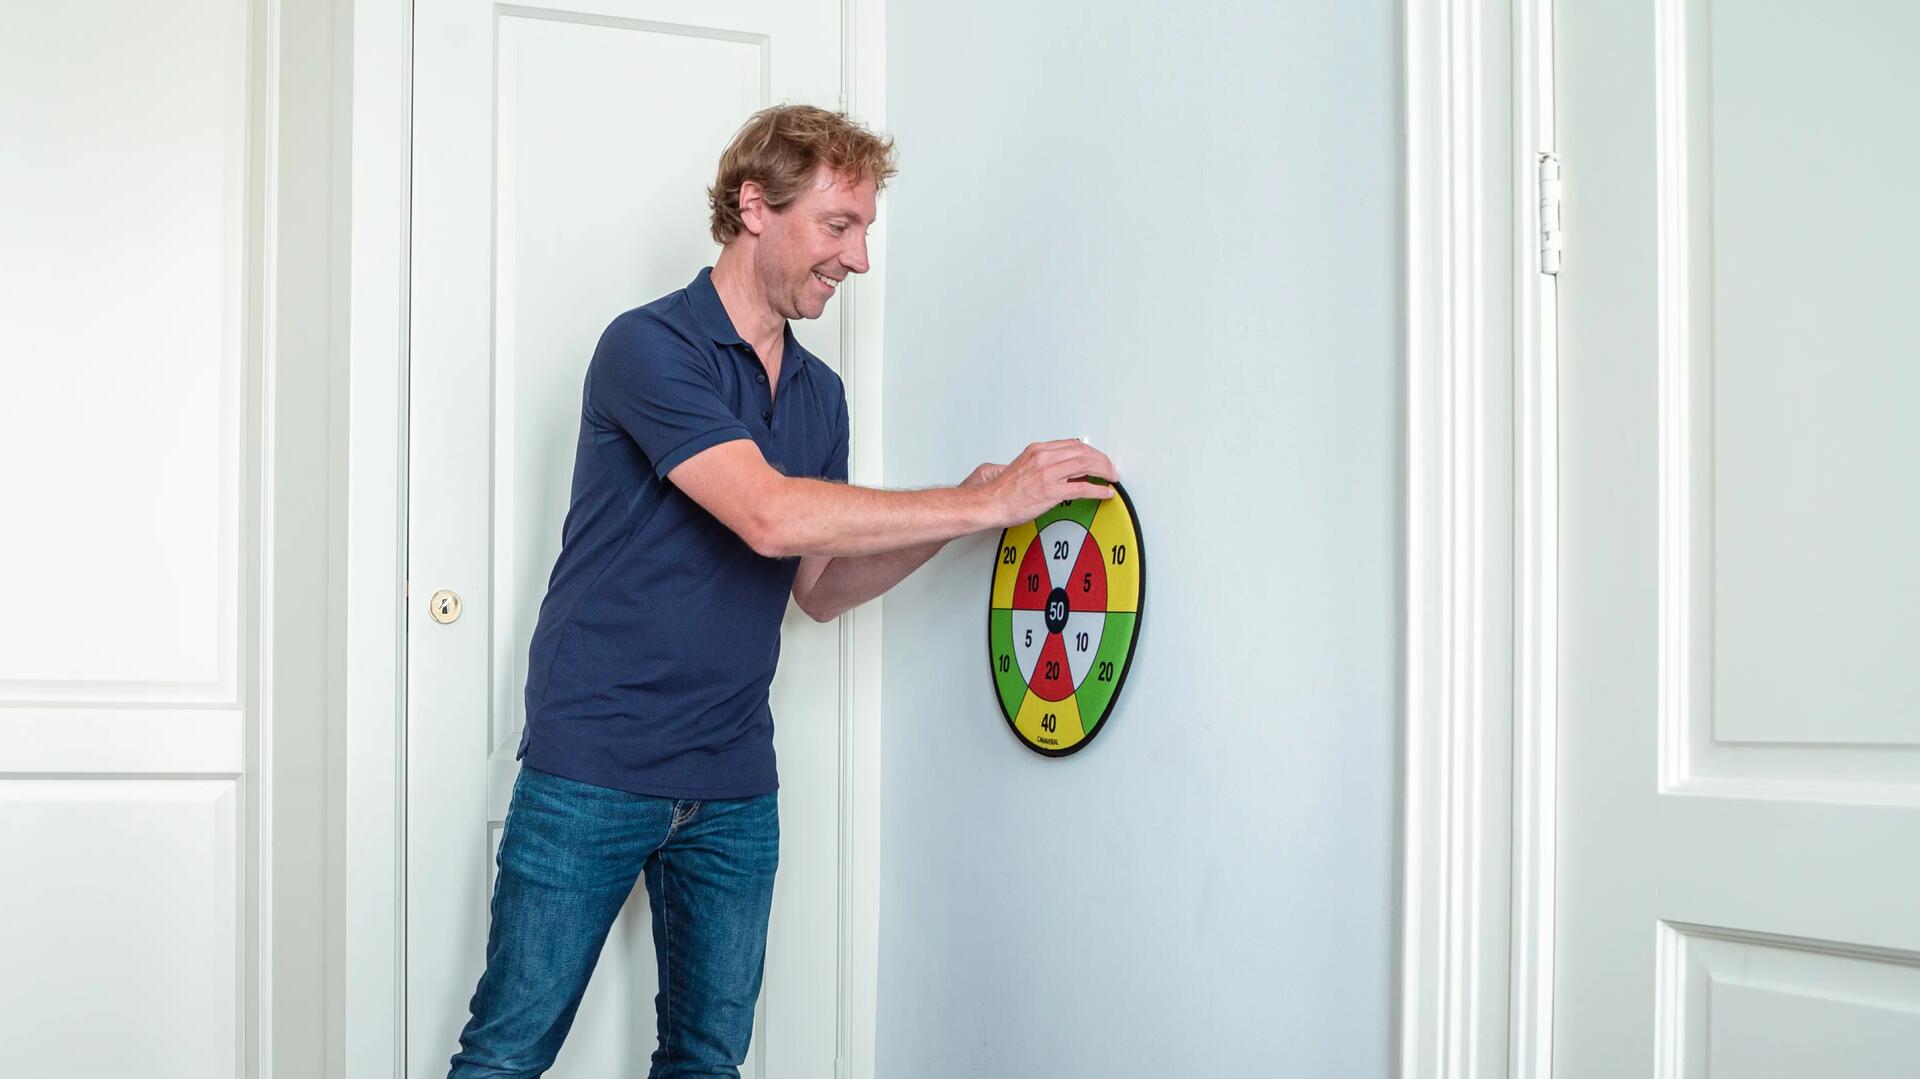 A man setting up a darts practise board for beginners